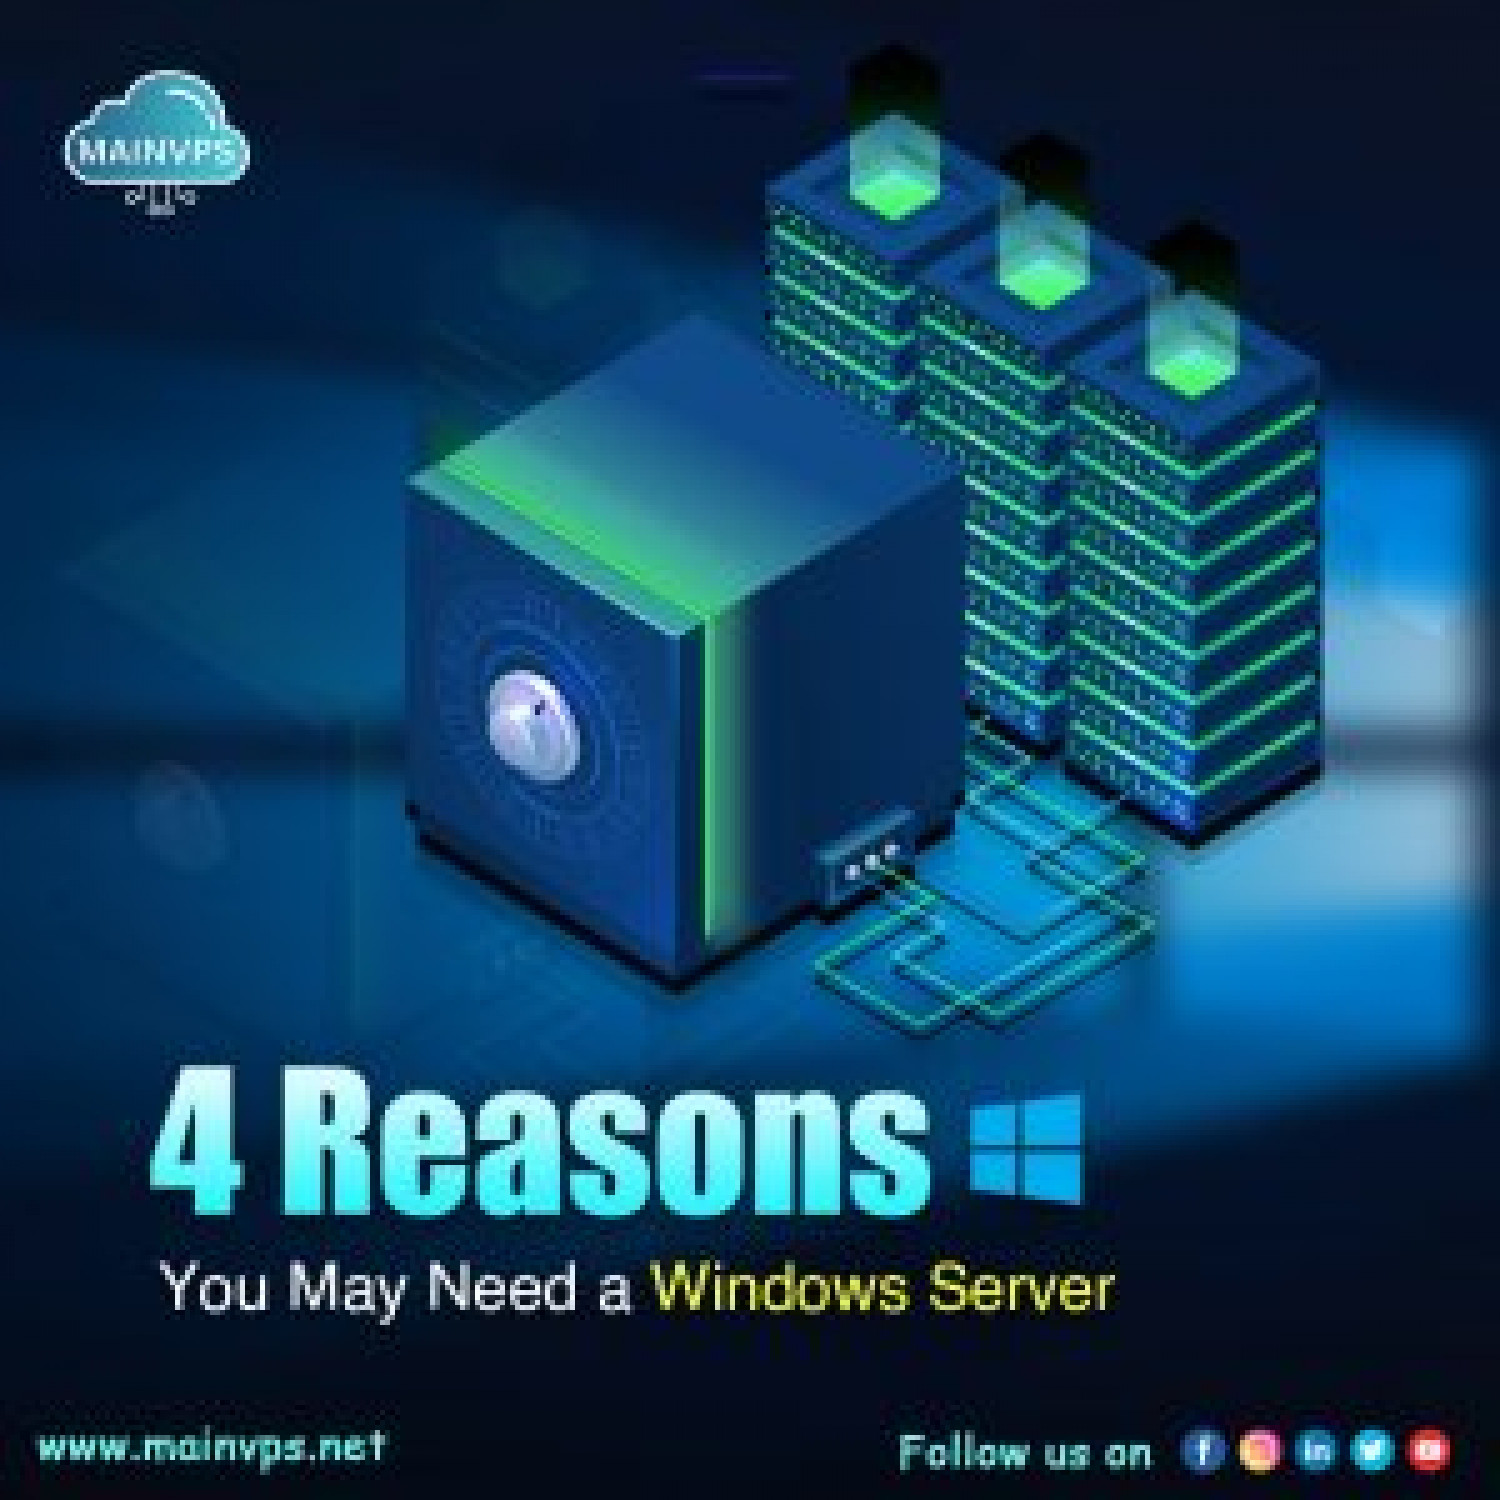 Reasons Why You Should Upgrade To Windows Server - MainVPS Infographic